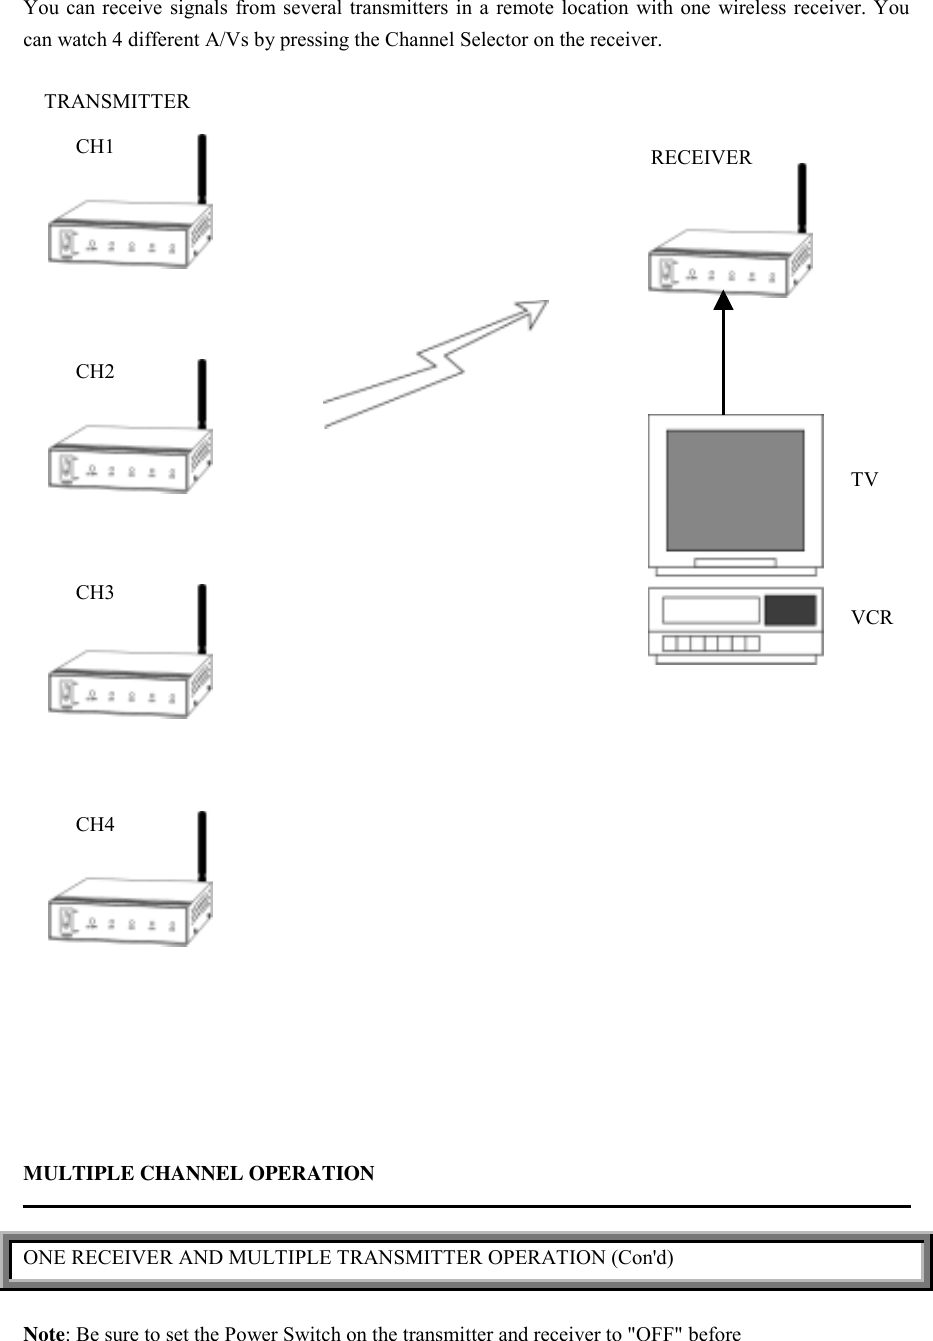 You can receive signals from several transmitters in a remote location with one wireless receiver. Youcan watch 4 different A/Vs by pressing the Channel Selector on the receiver.    TRANSMITTERMULTIPLE CHANNEL OPERATIONONE RECEIVER AND MULTIPLE TRANSMITTER OPERATION (Con&apos;d)Note: Be sure to set the Power Switch on the transmitter and receiver to &quot;OFF&quot; beforeCH1CH2CH3CH4RECEIVERTVVCR